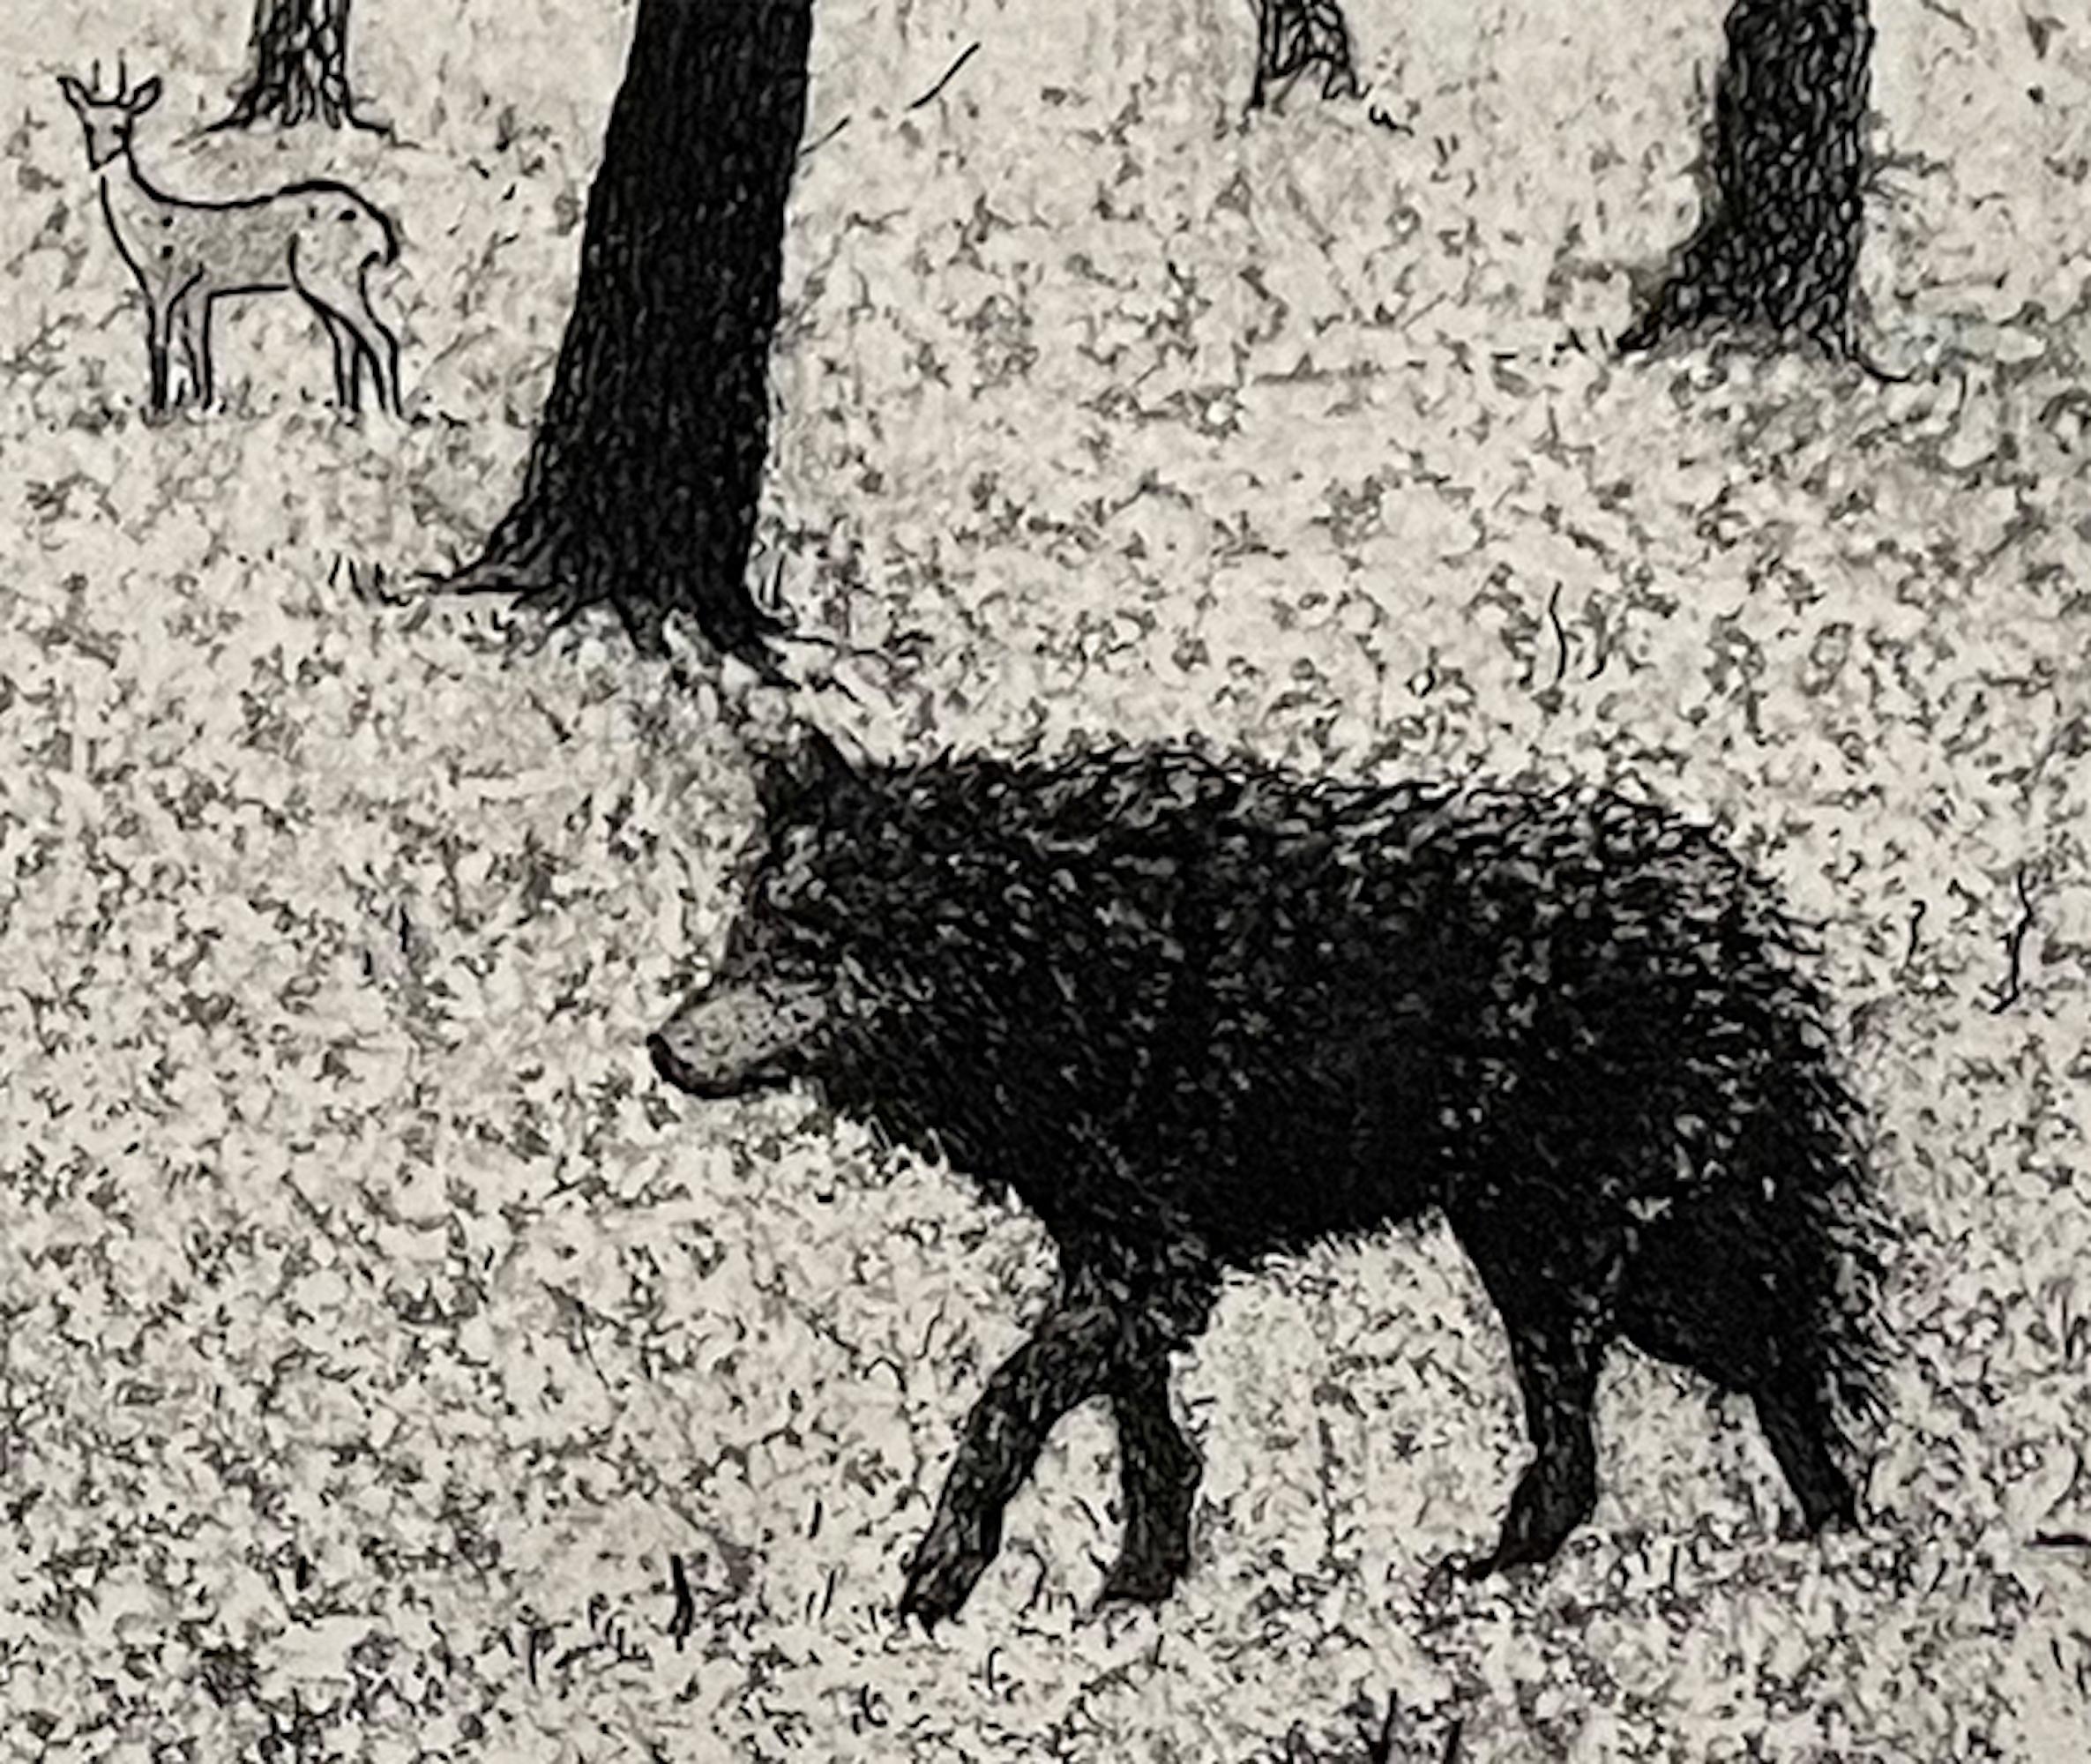 Tim Southall, Lone Wolf, Black and White Handmade Print, Modern Landscape Art For Sale 2